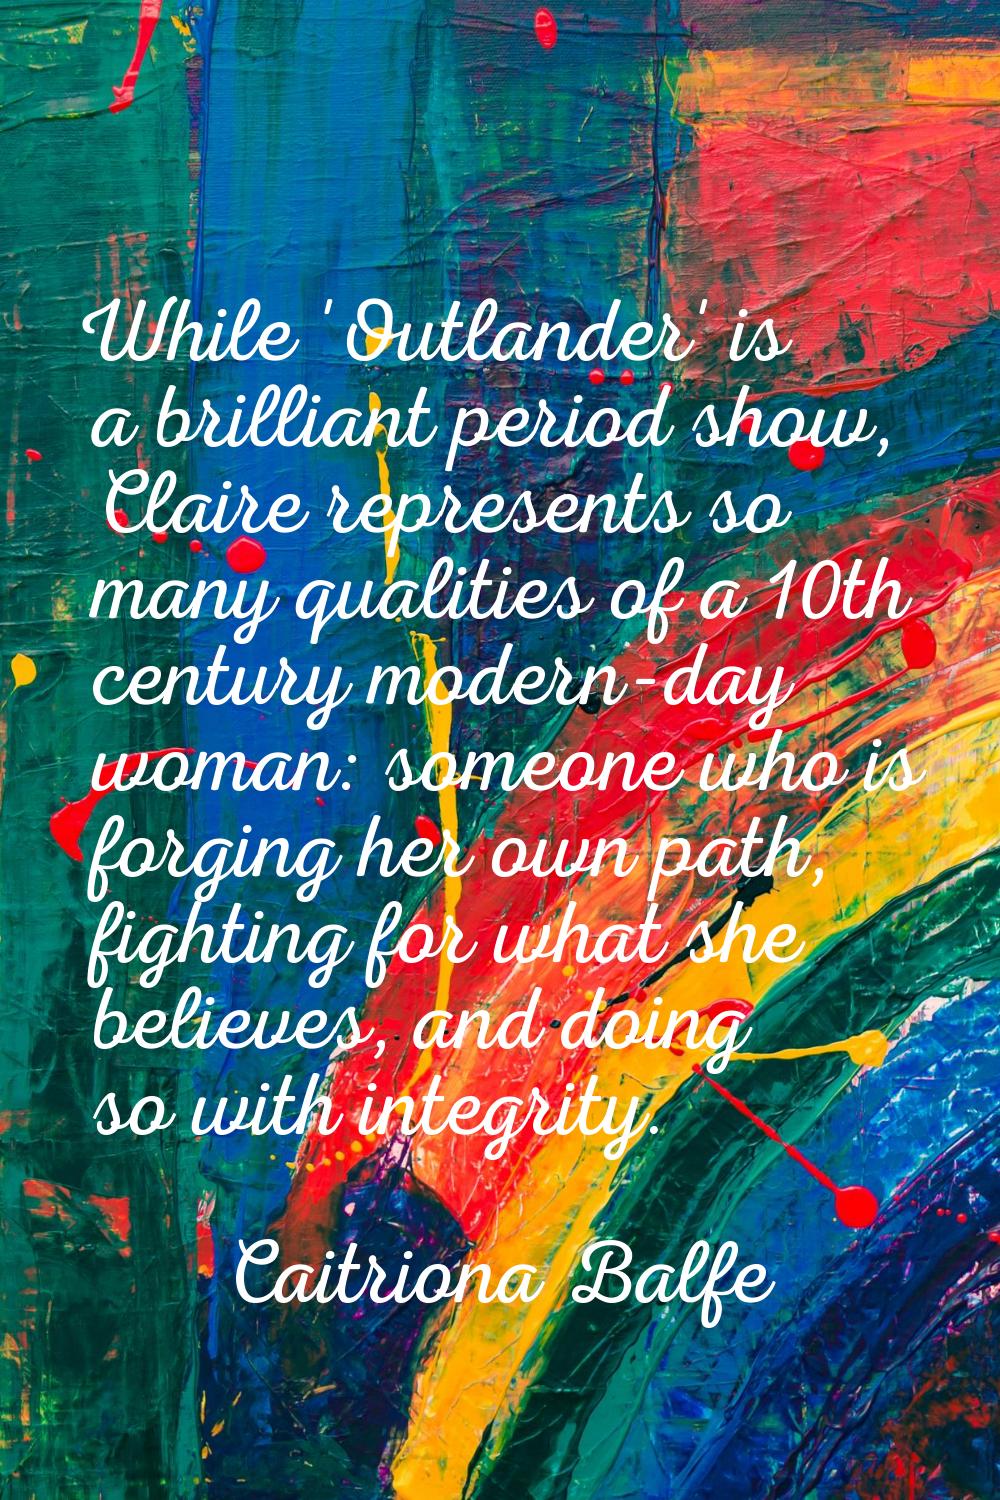 While 'Outlander' is a brilliant period show, Claire represents so many qualities of a 10th century